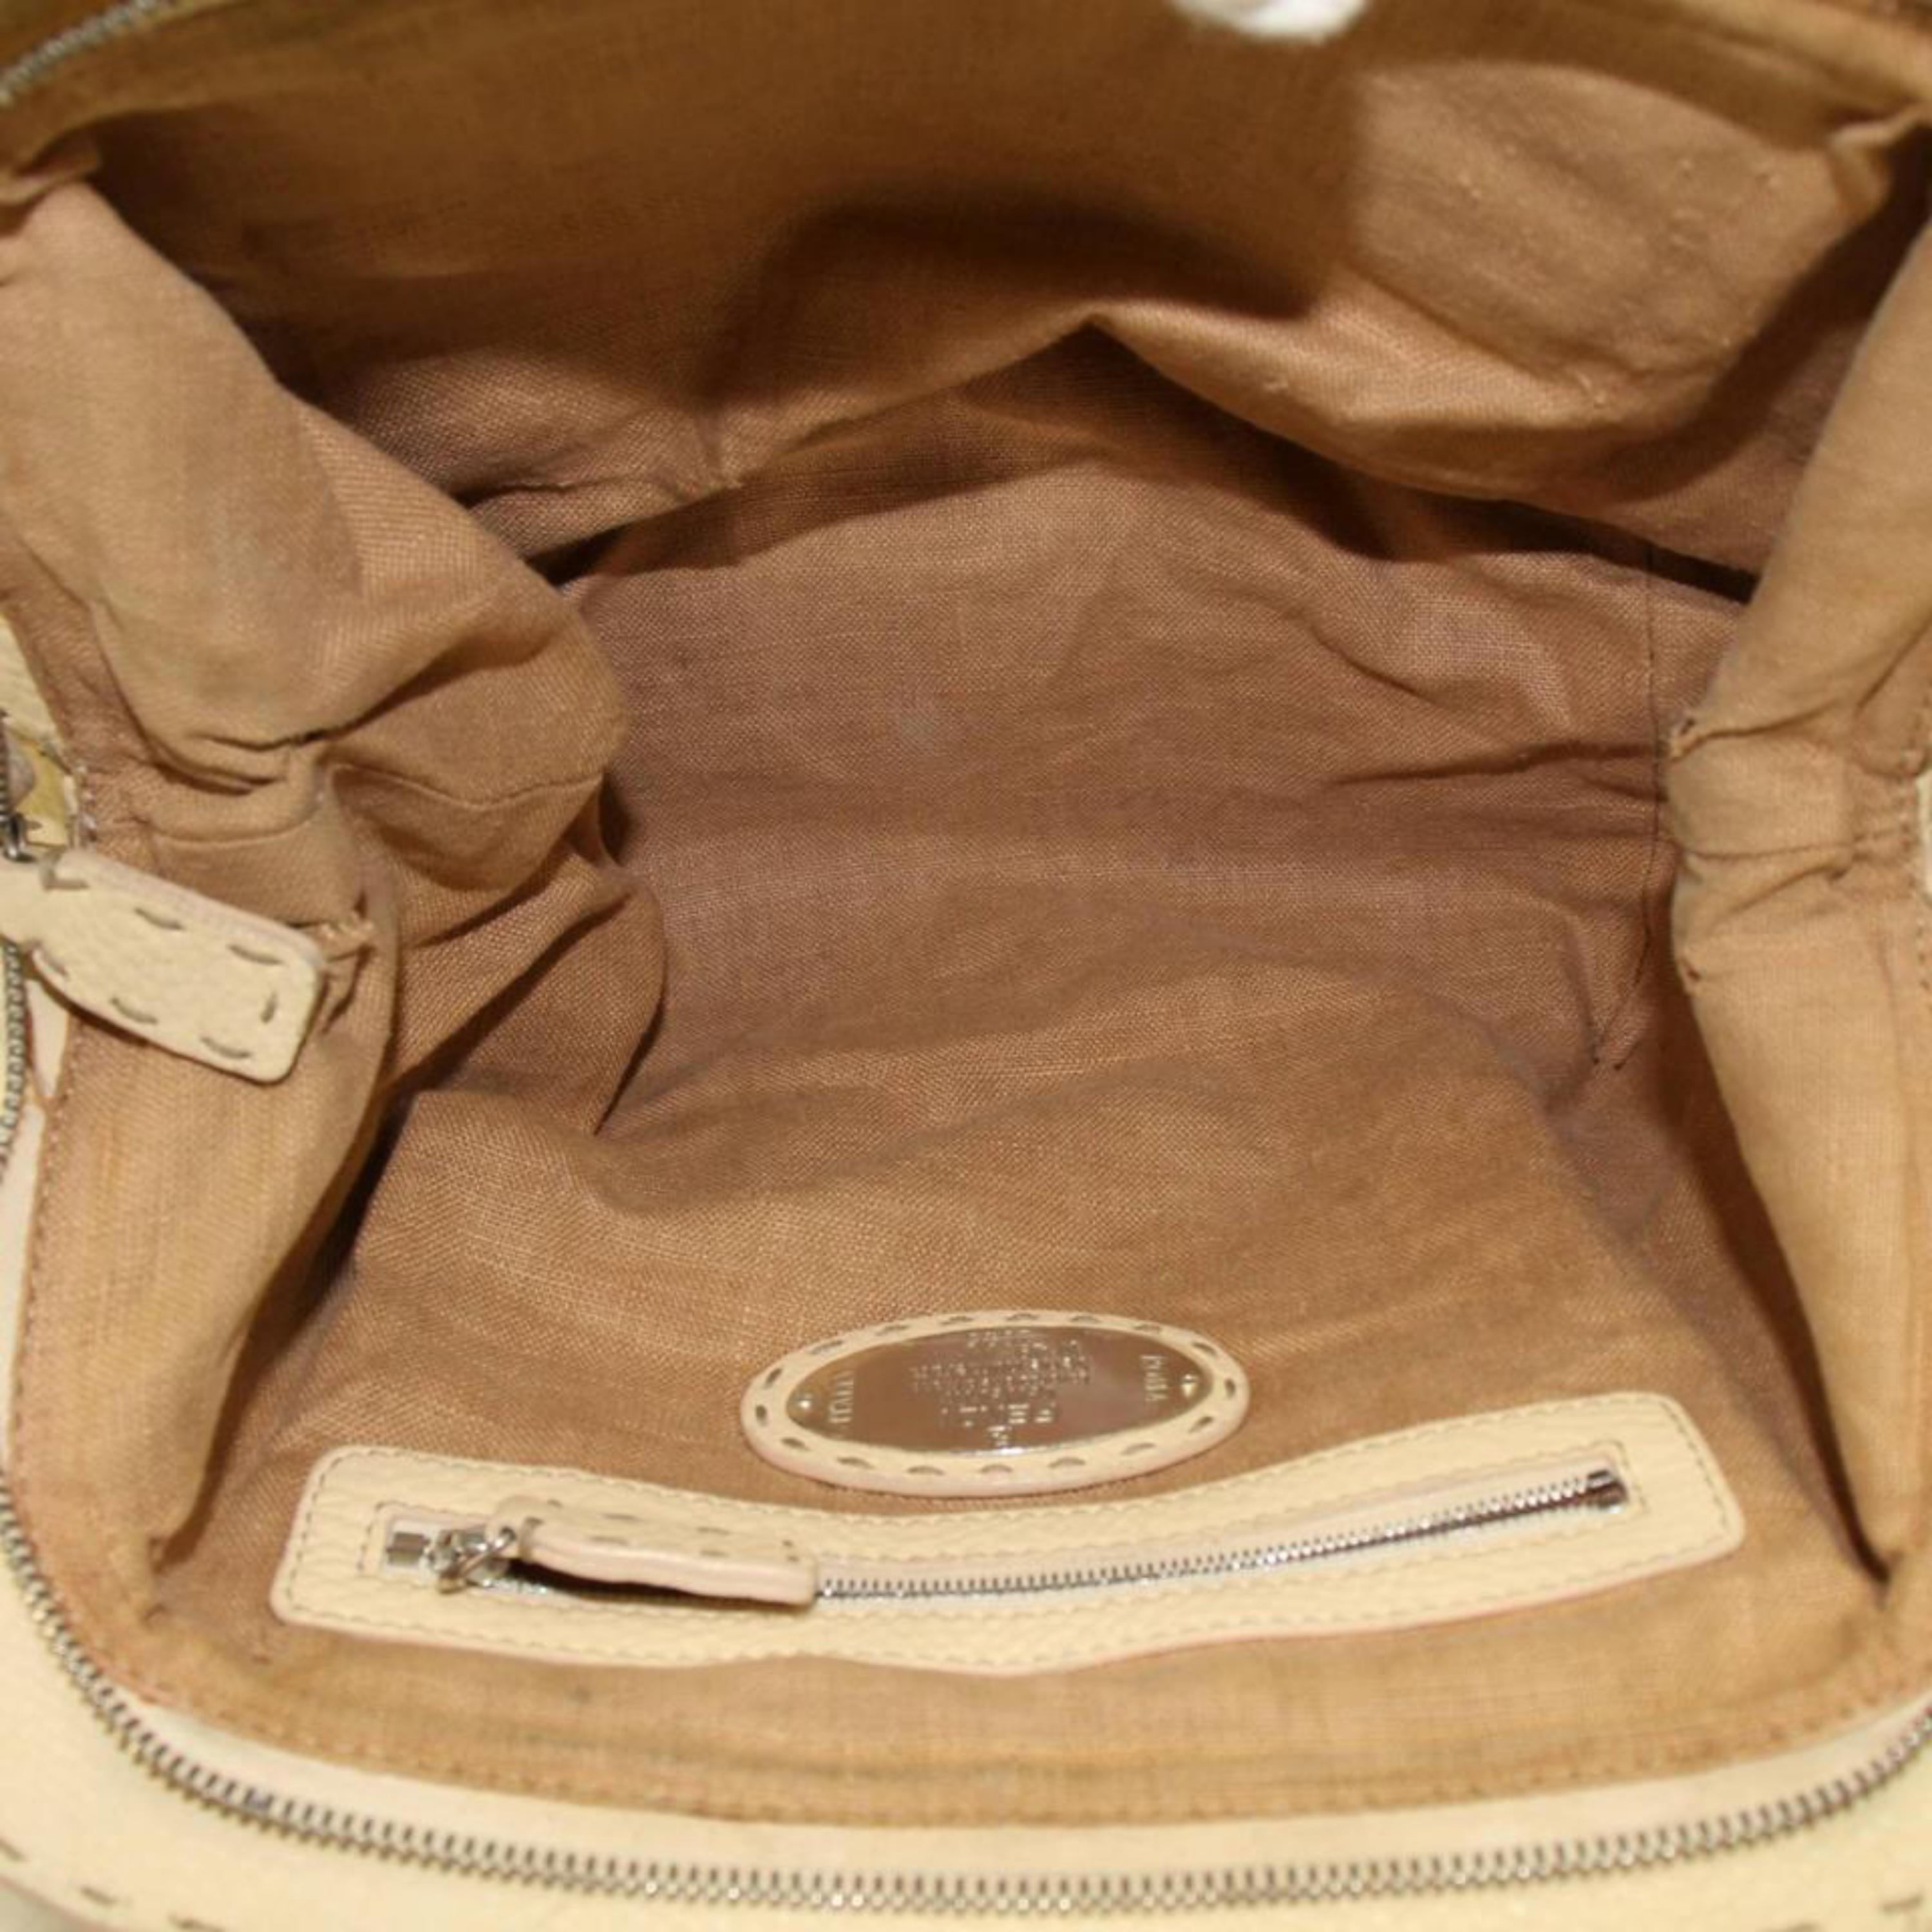 Fendi Selleria Bowler 867819 Ivory Leather Satchel In Good Condition For Sale In Forest Hills, NY